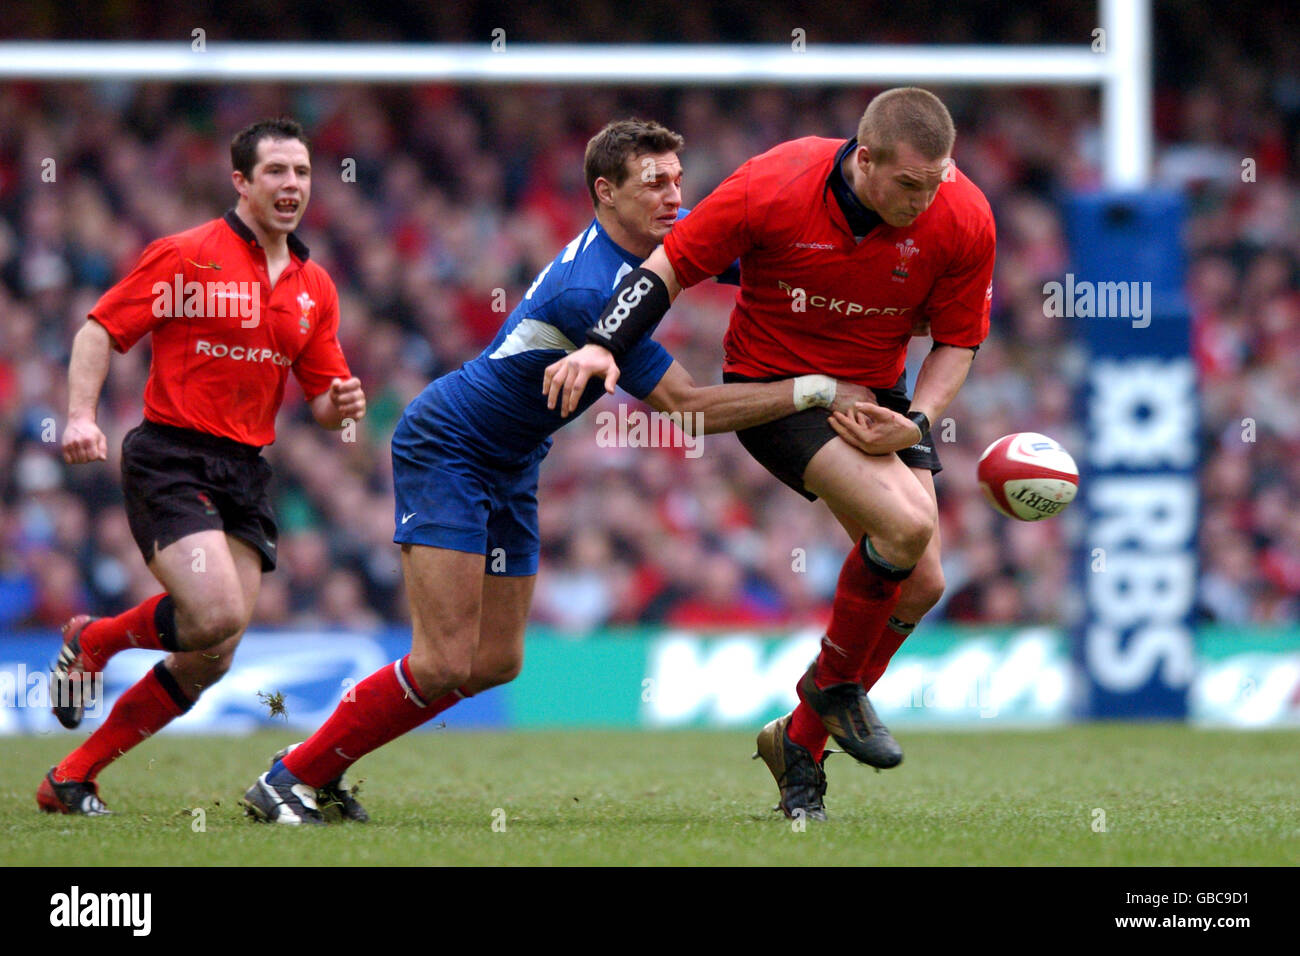 Rugby Union - The RBS Six Nations Championship - Wales v France. Wales' Gethin Jenkins spills the ball as he is tackled by France's Nicolas Brusque (c) Stock Photo